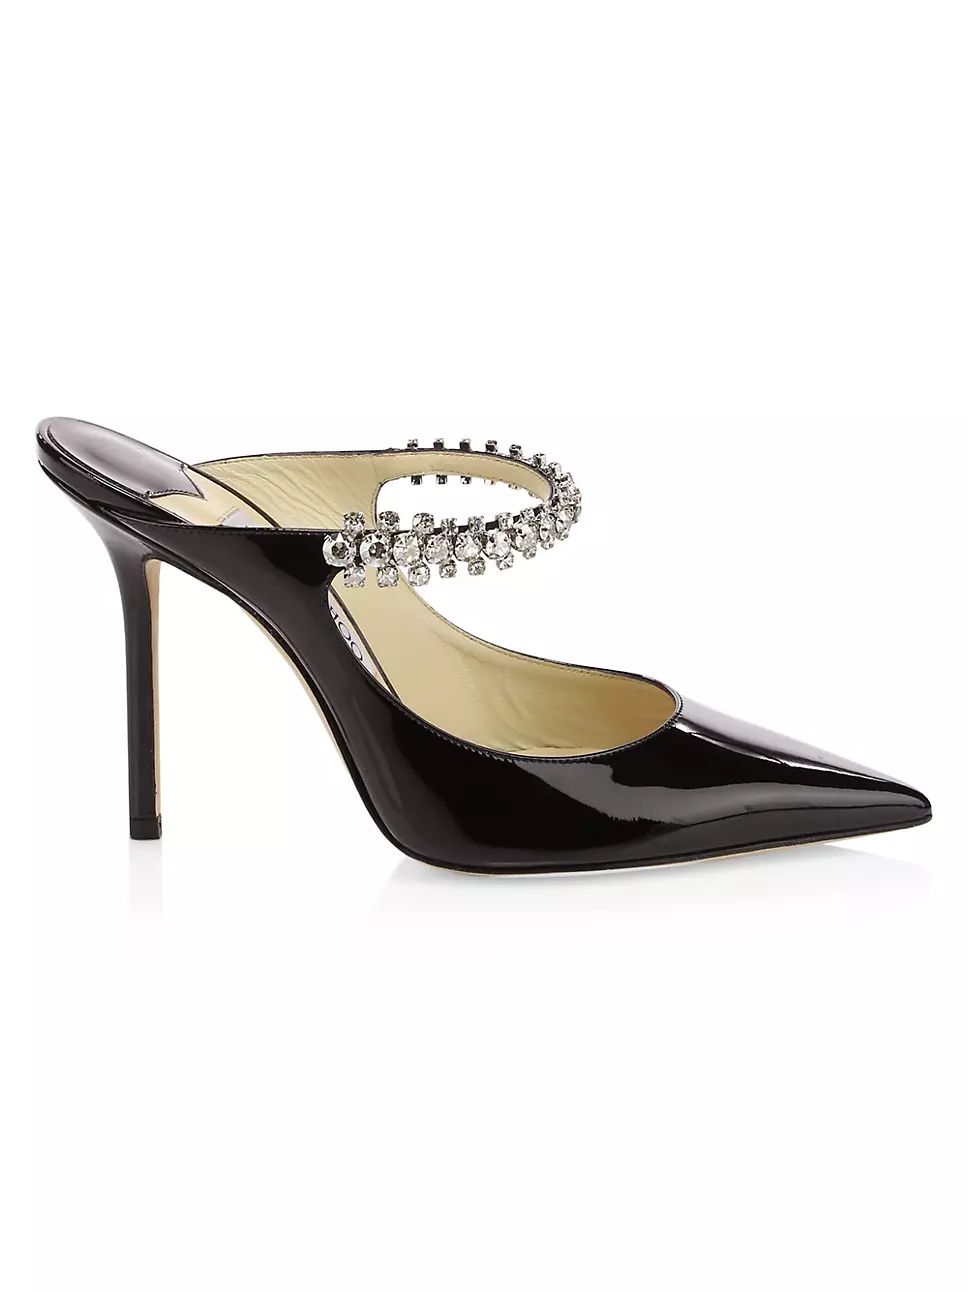 Bing 100 Embellished Patent Leather Mules | Saks Fifth Avenue